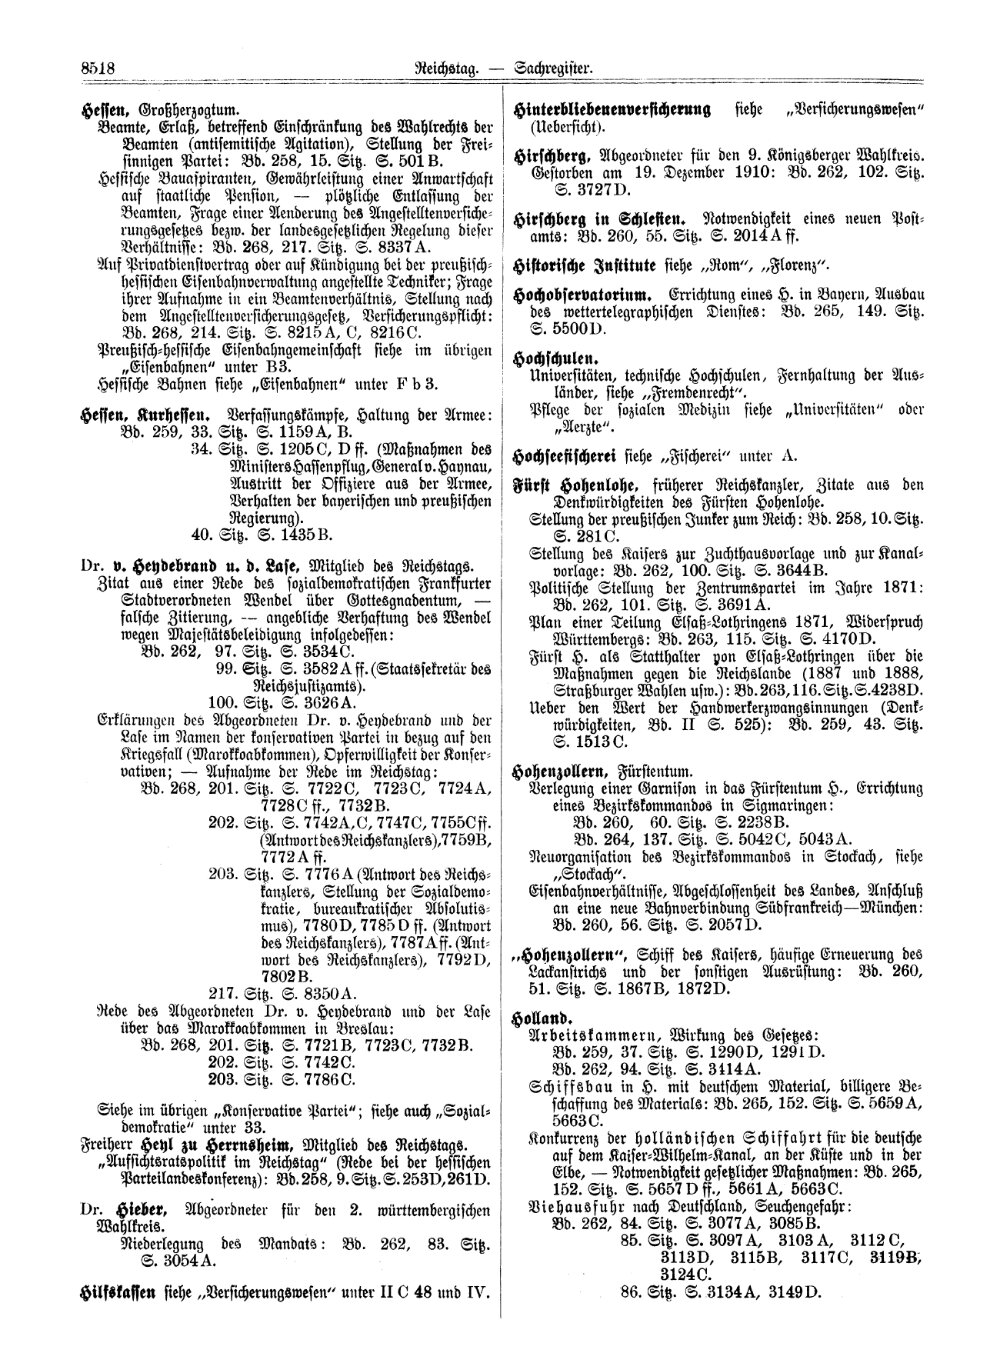 Scan of page 8518